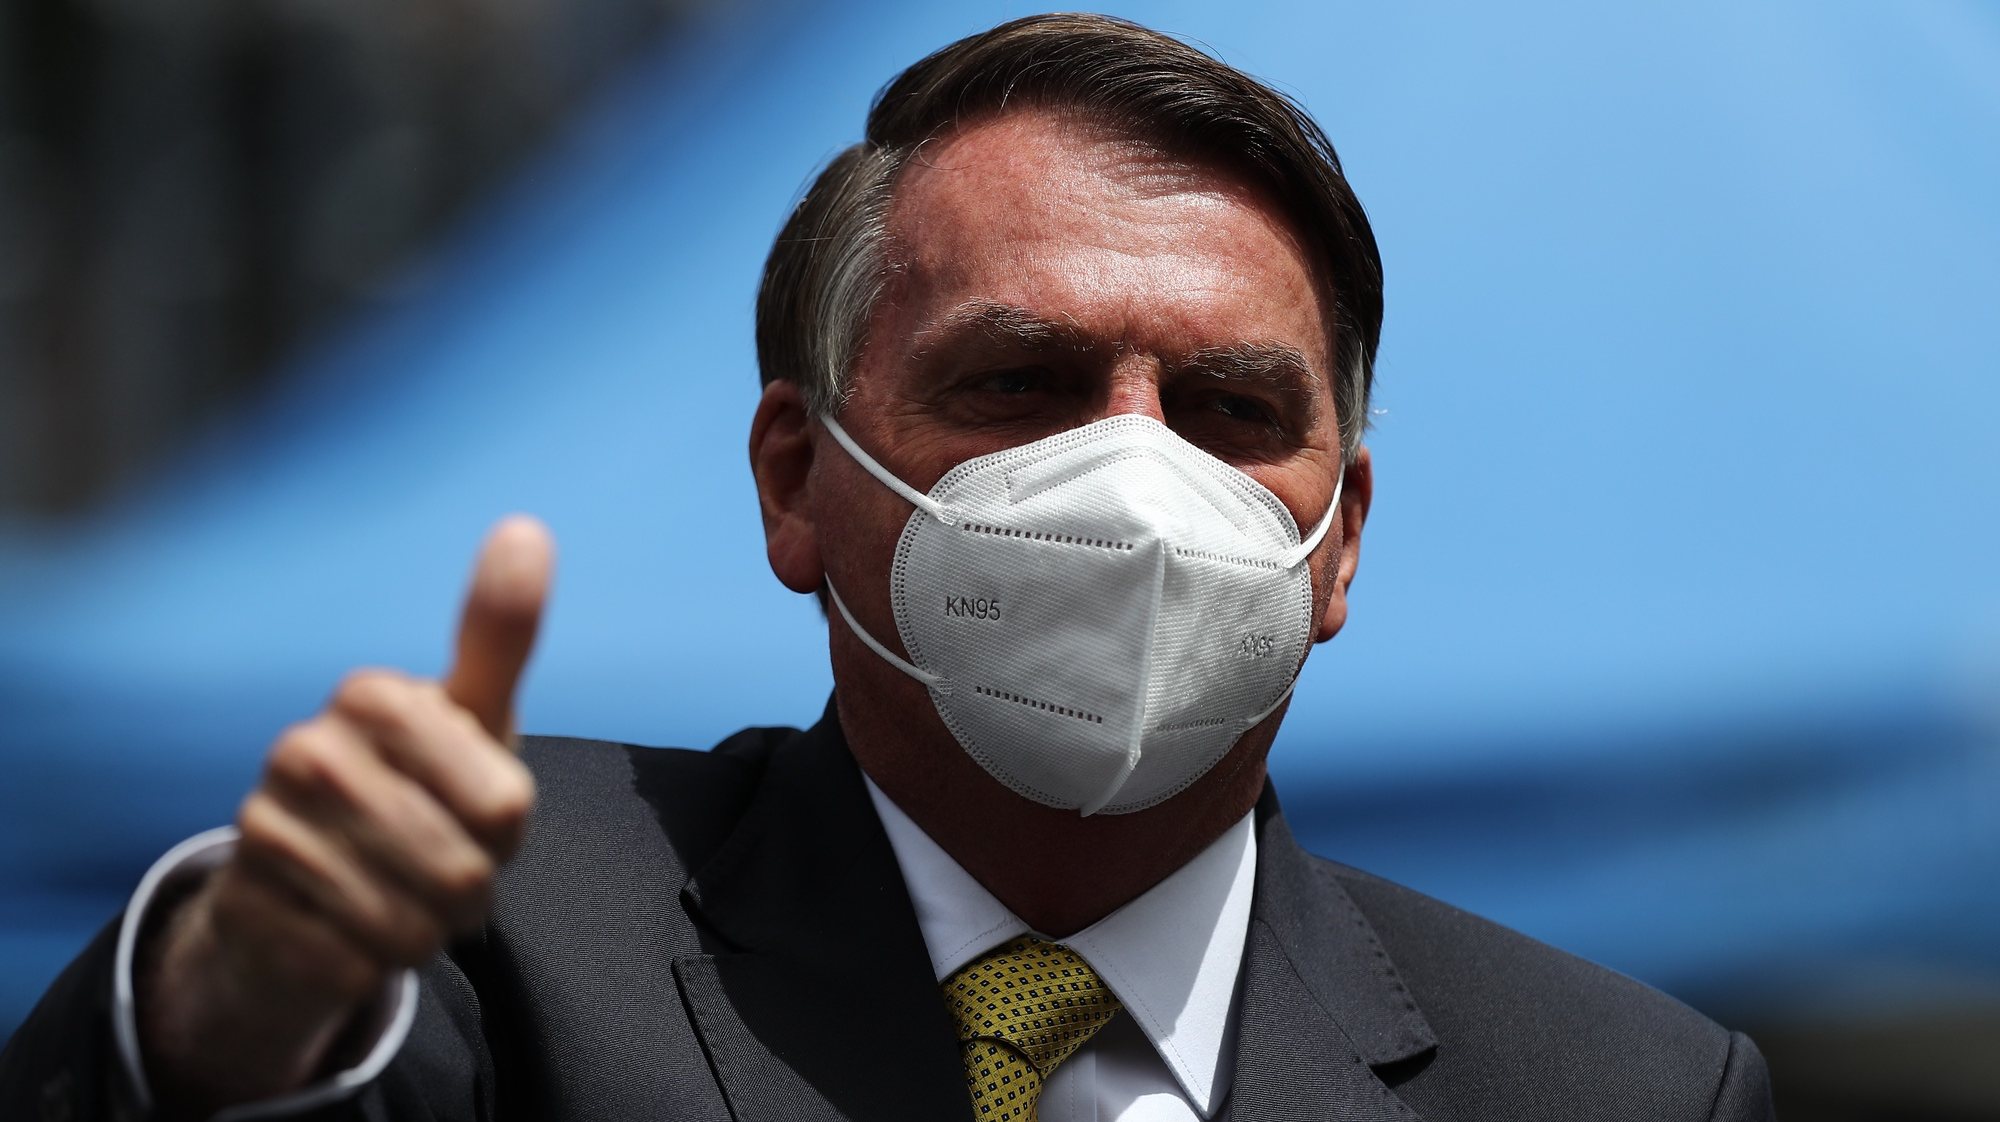 epa09225628 Brazilian President Jair Bolsonaro attends the investiture of the new president of Ecuador, Guillermo Lasso, at the headquarters of the National Assembly, in Quito, Ecuador, 24 May 2021. Guillermo Lasso, who takes office as President of Ecuador, faces the challenges of promoting mass vaccination against covid-19 as the main recipe to reactivate an economy that depends on international aid and with a limited budget. For now, he has already anticipated that his administration will bet on doubling oil production, will put gasoline refineries under concession, will promote mining and offer several state areas to private initiative.  EPA/Jose Jacome